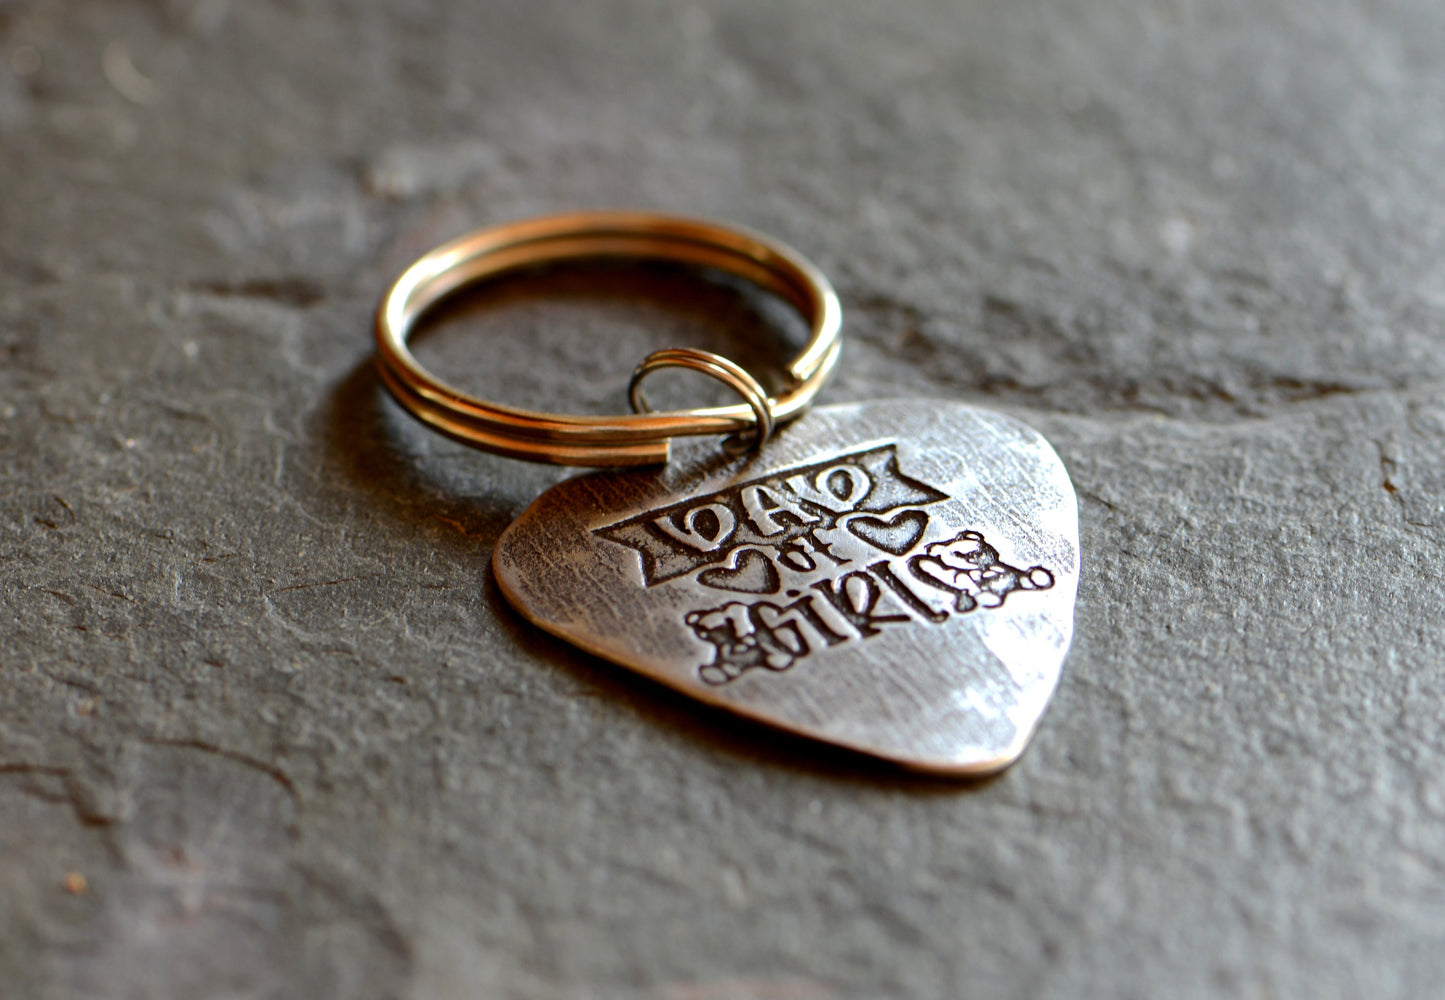 Sterling silver guitar pick keychain stamped with Dad of Girls